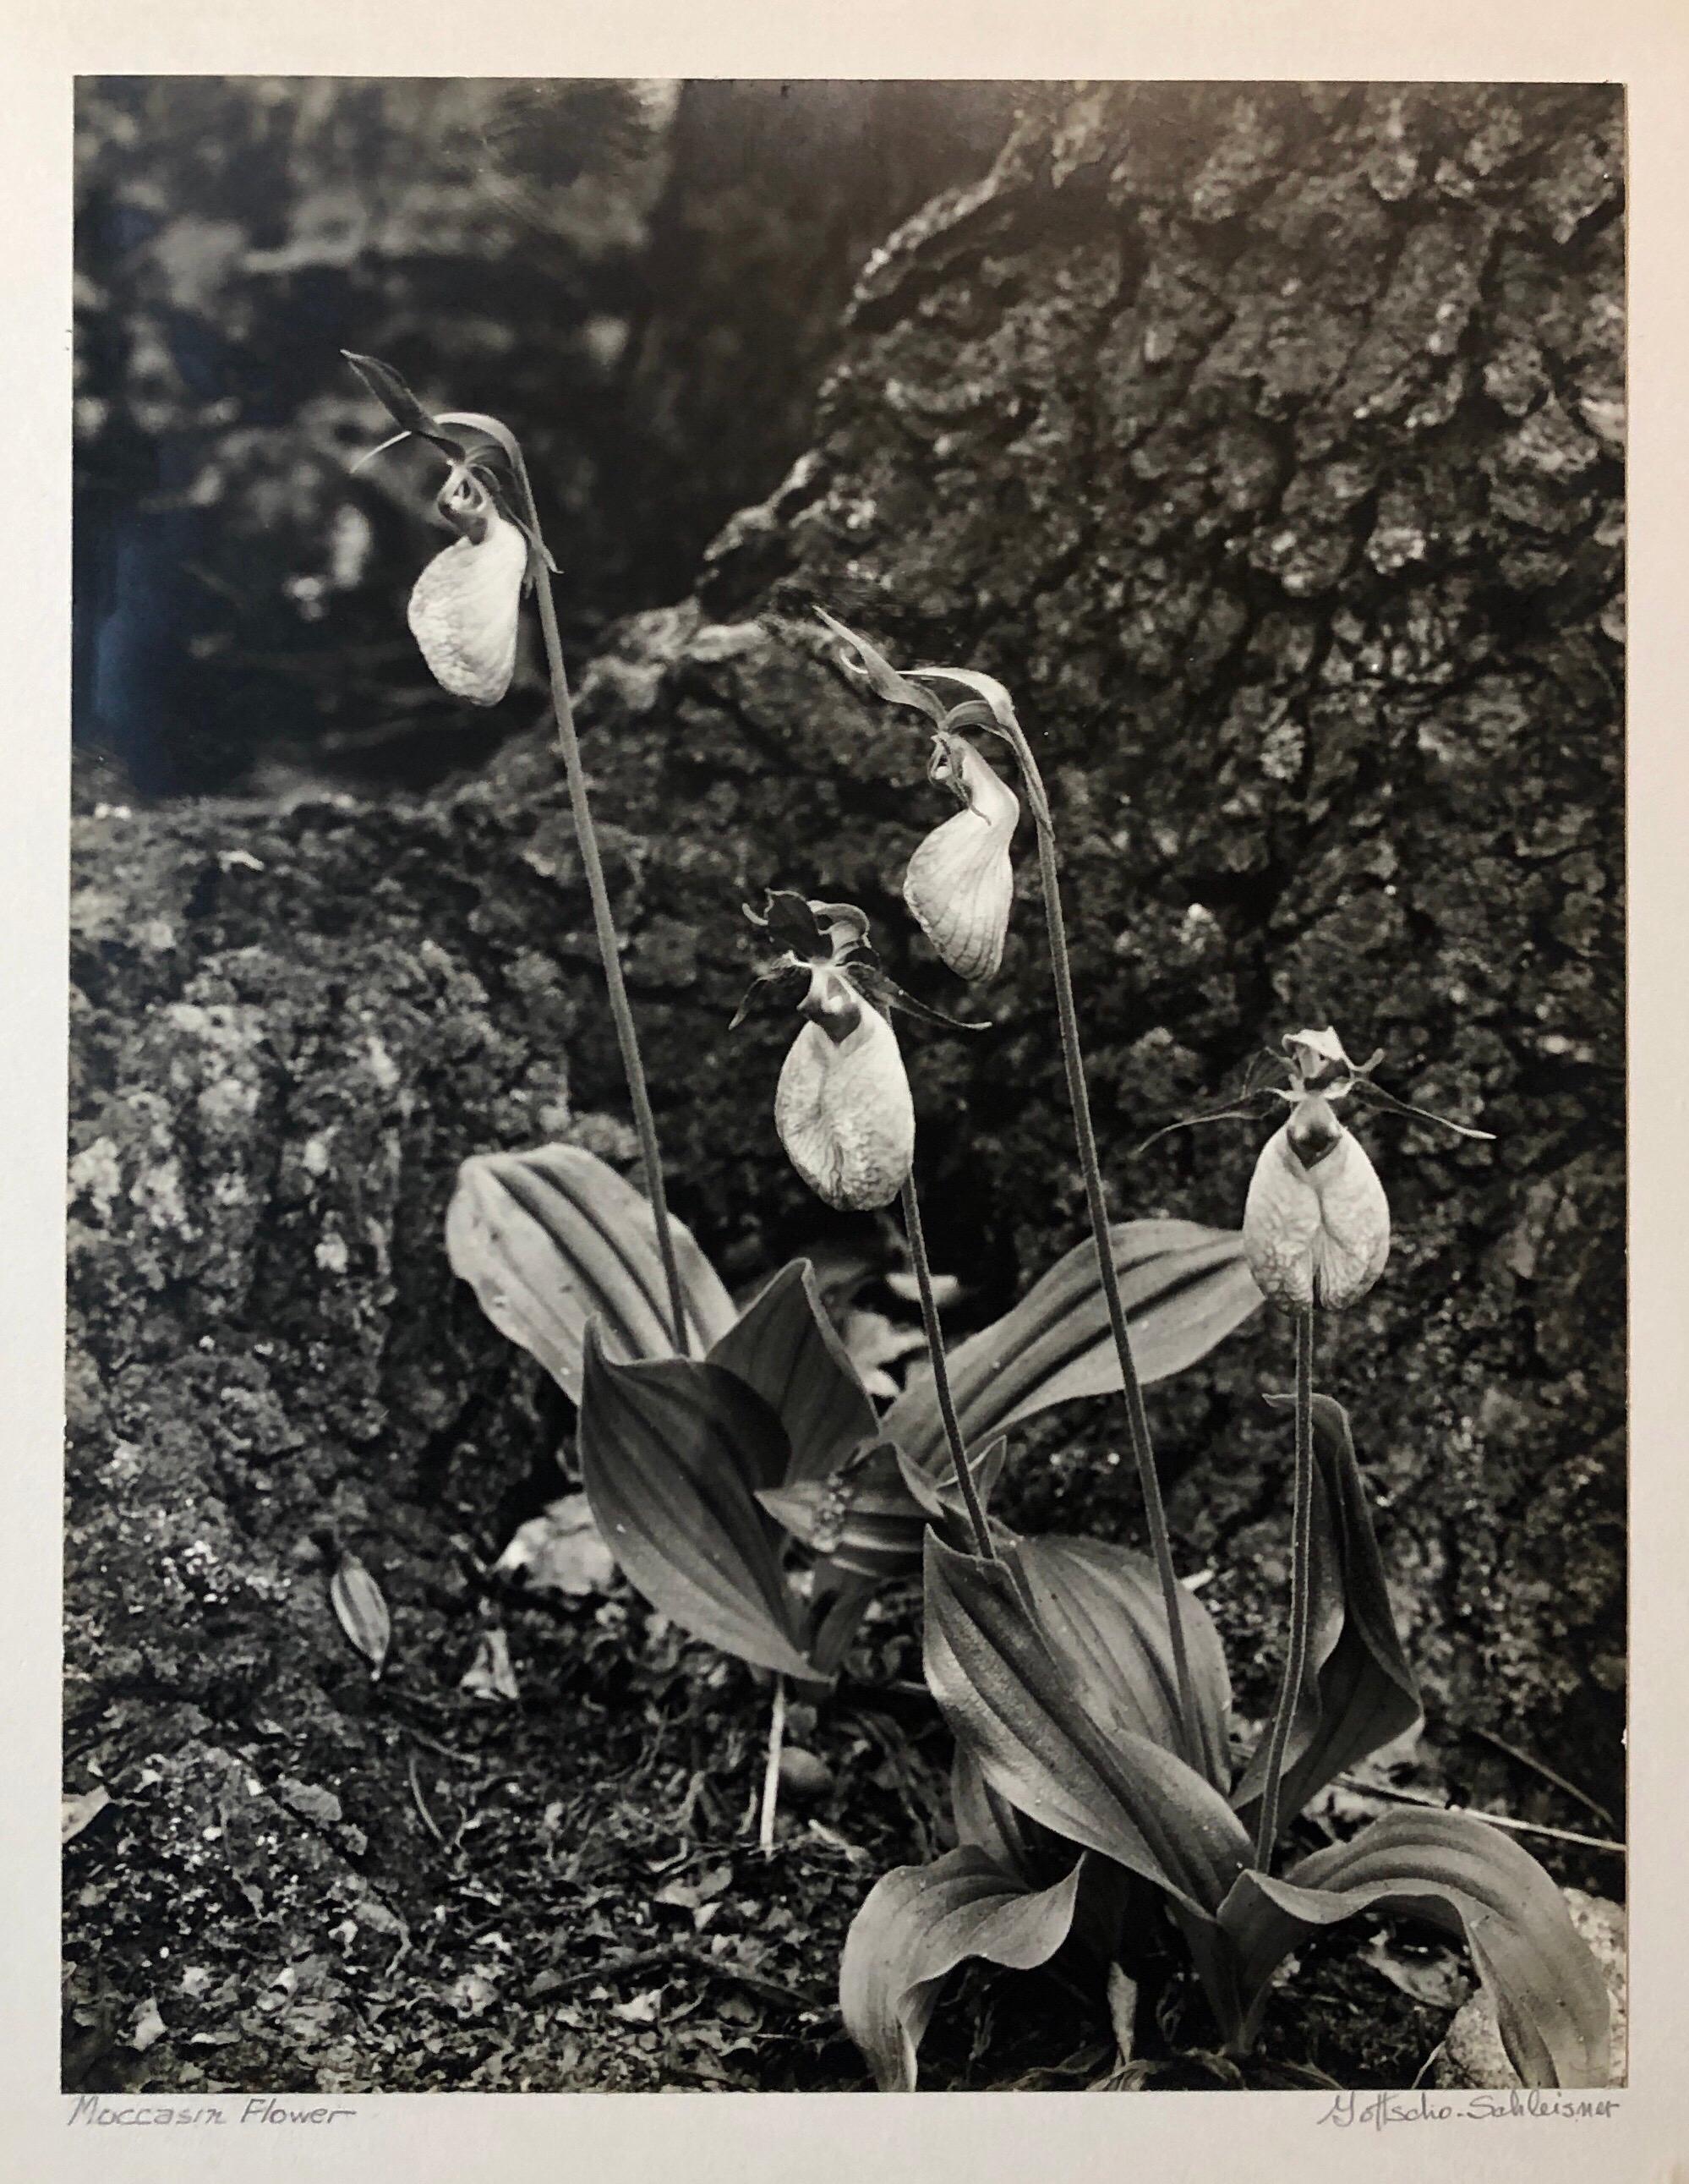 Vintage hand signed and stamp signed with the photographers stamp and numbered photo of Moccasin Flower.
Samuel Herman Gottscho (February 8, 1875 - January 28, 1971) was an American architectural, landscape, and nature photographer.
Samuel Gottscho